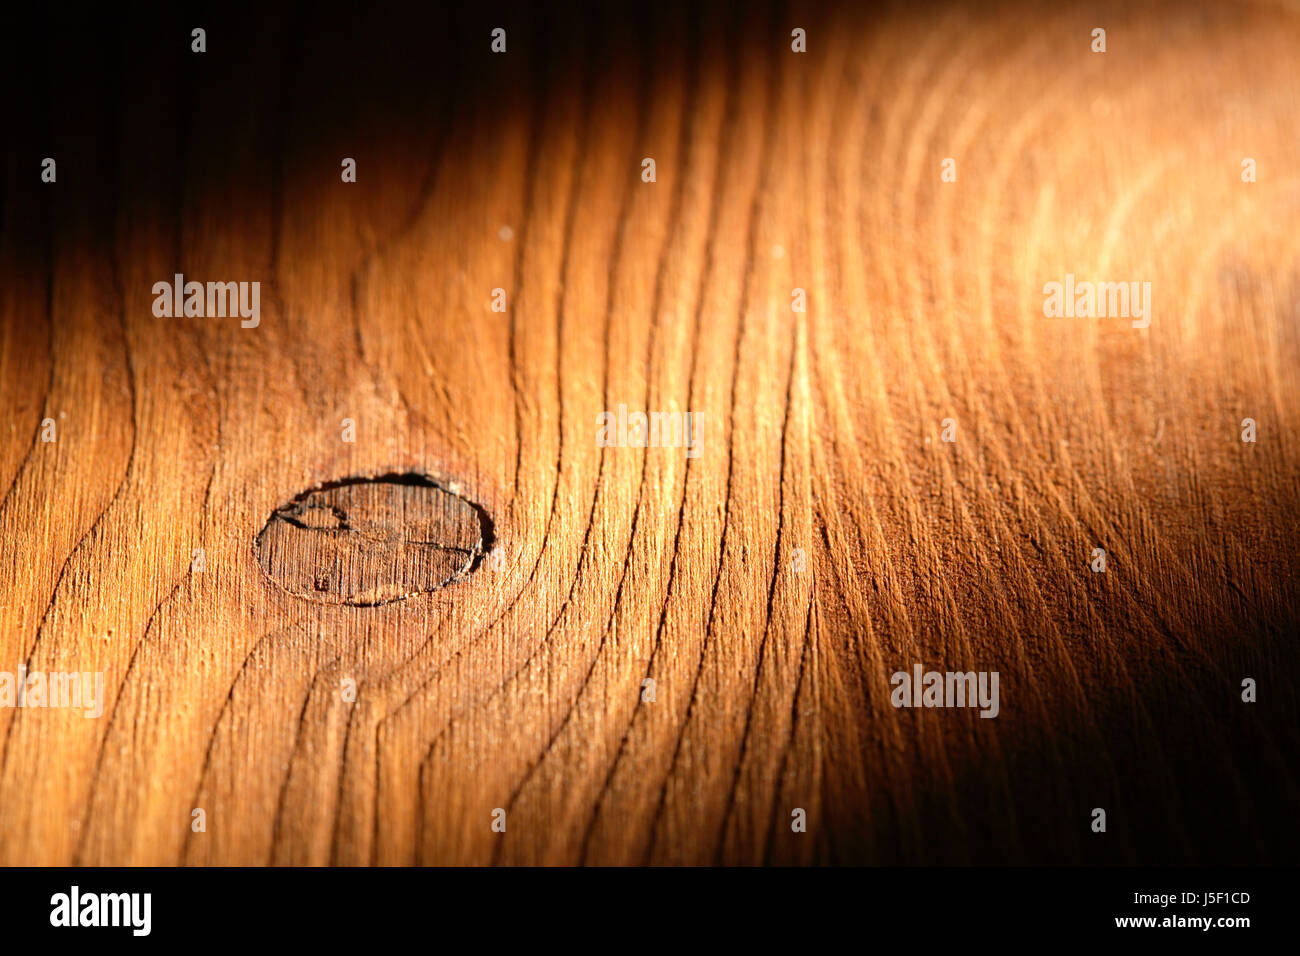 Nice wooden background with knot under beam of light Stock Photo